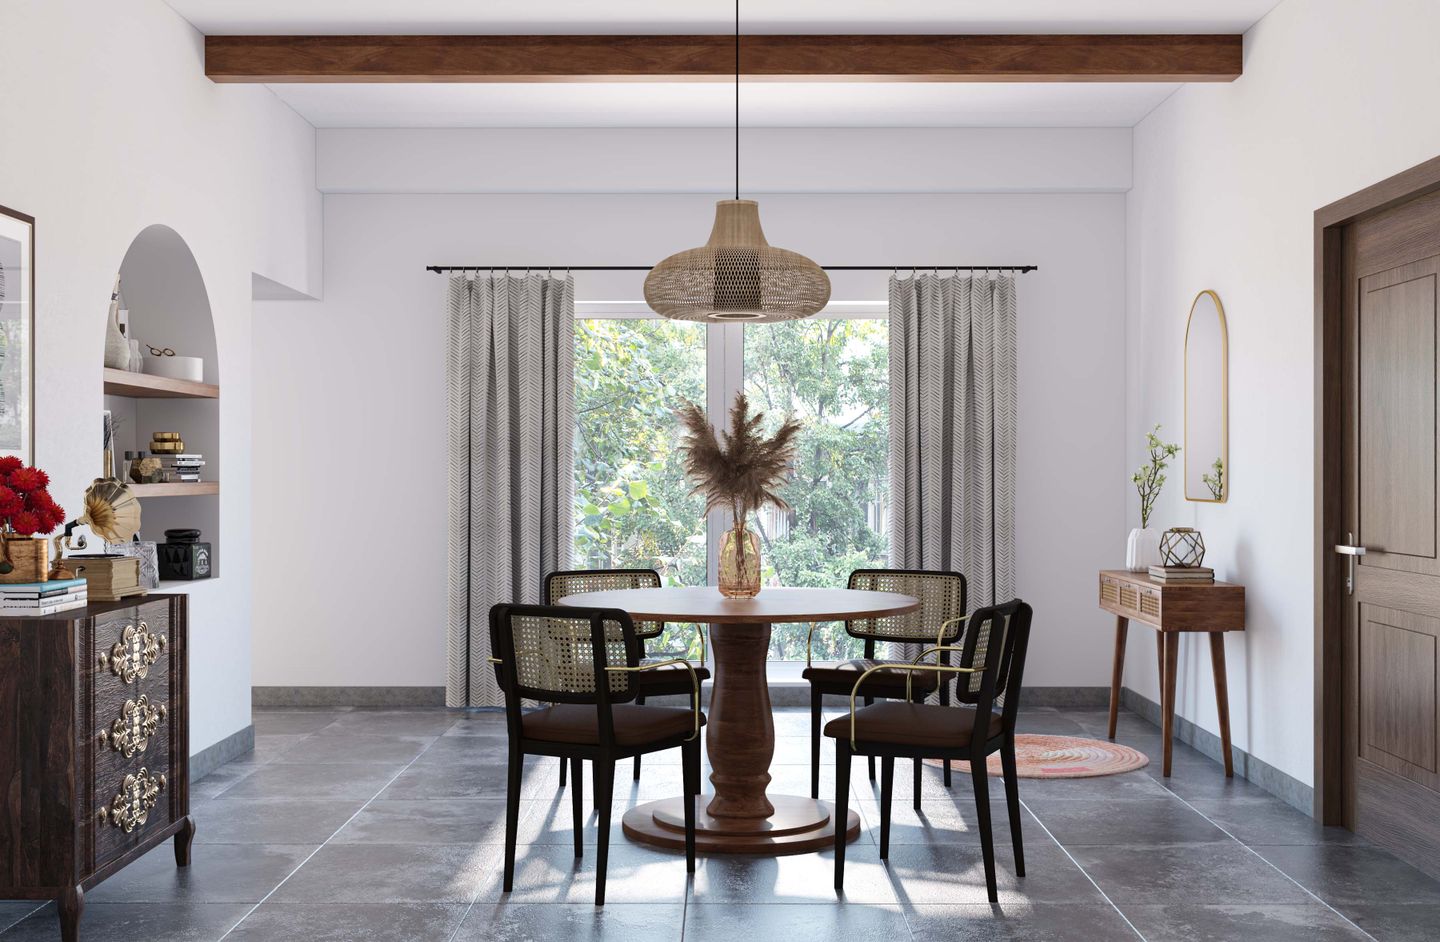 Convenient Dining Room With Contemporary Interiors With Traditional Touch - Livspace